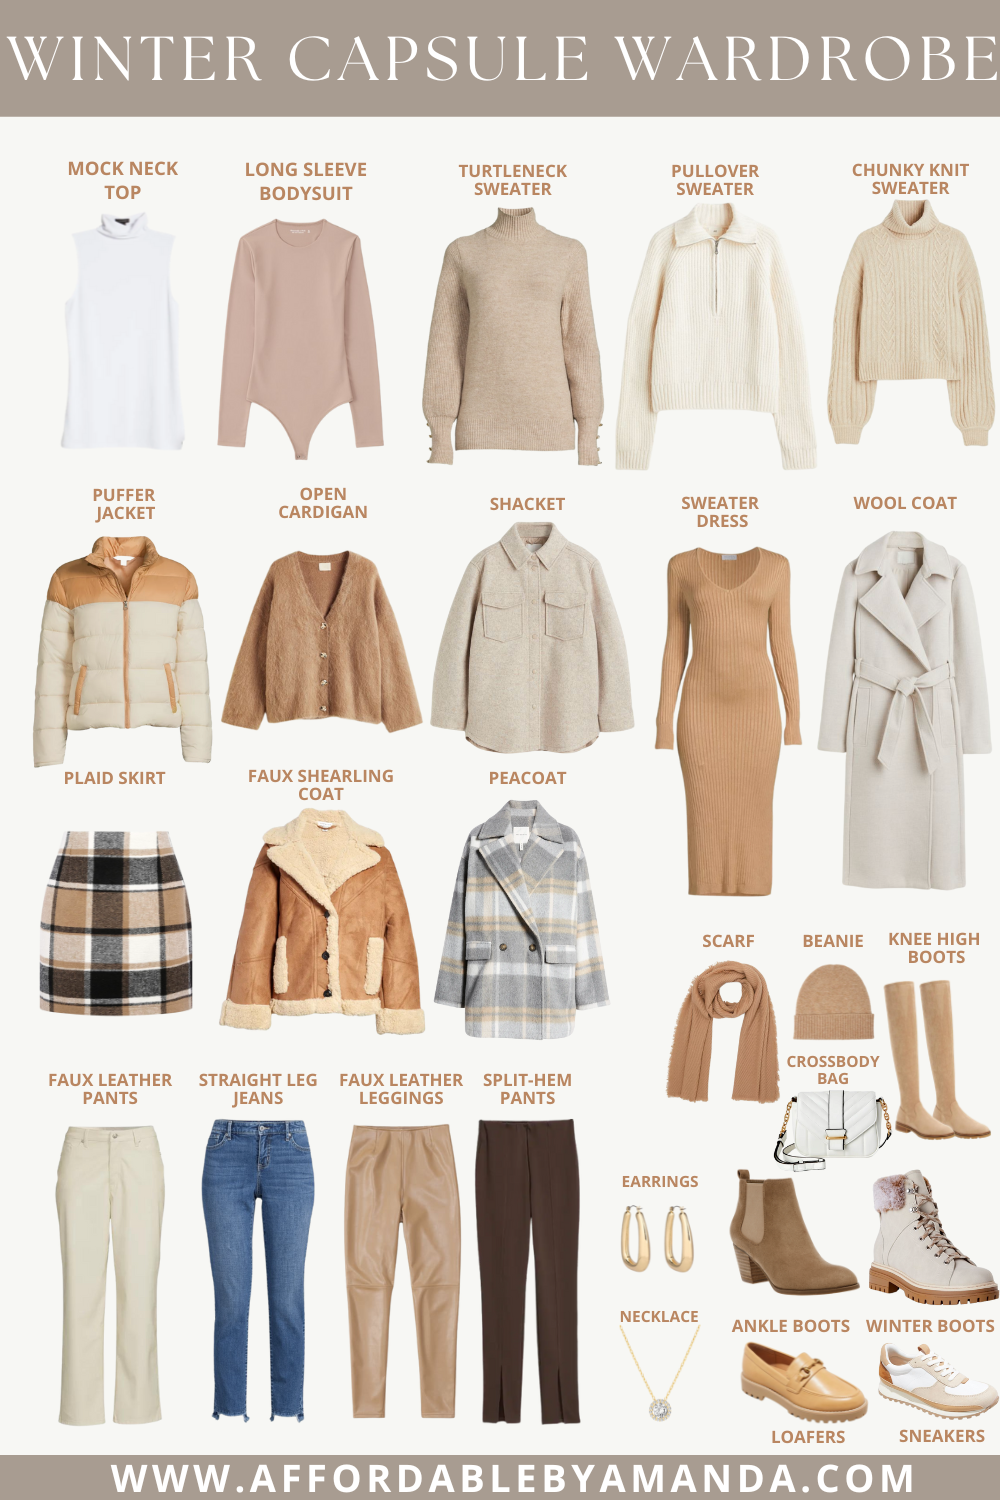 Winter Capsule Wardrobe 2022 - What To Wear in Winter 2022 - Capsule Wardrobe - Everything You Need in 2022 Fall Winter Capsule Wardrobe